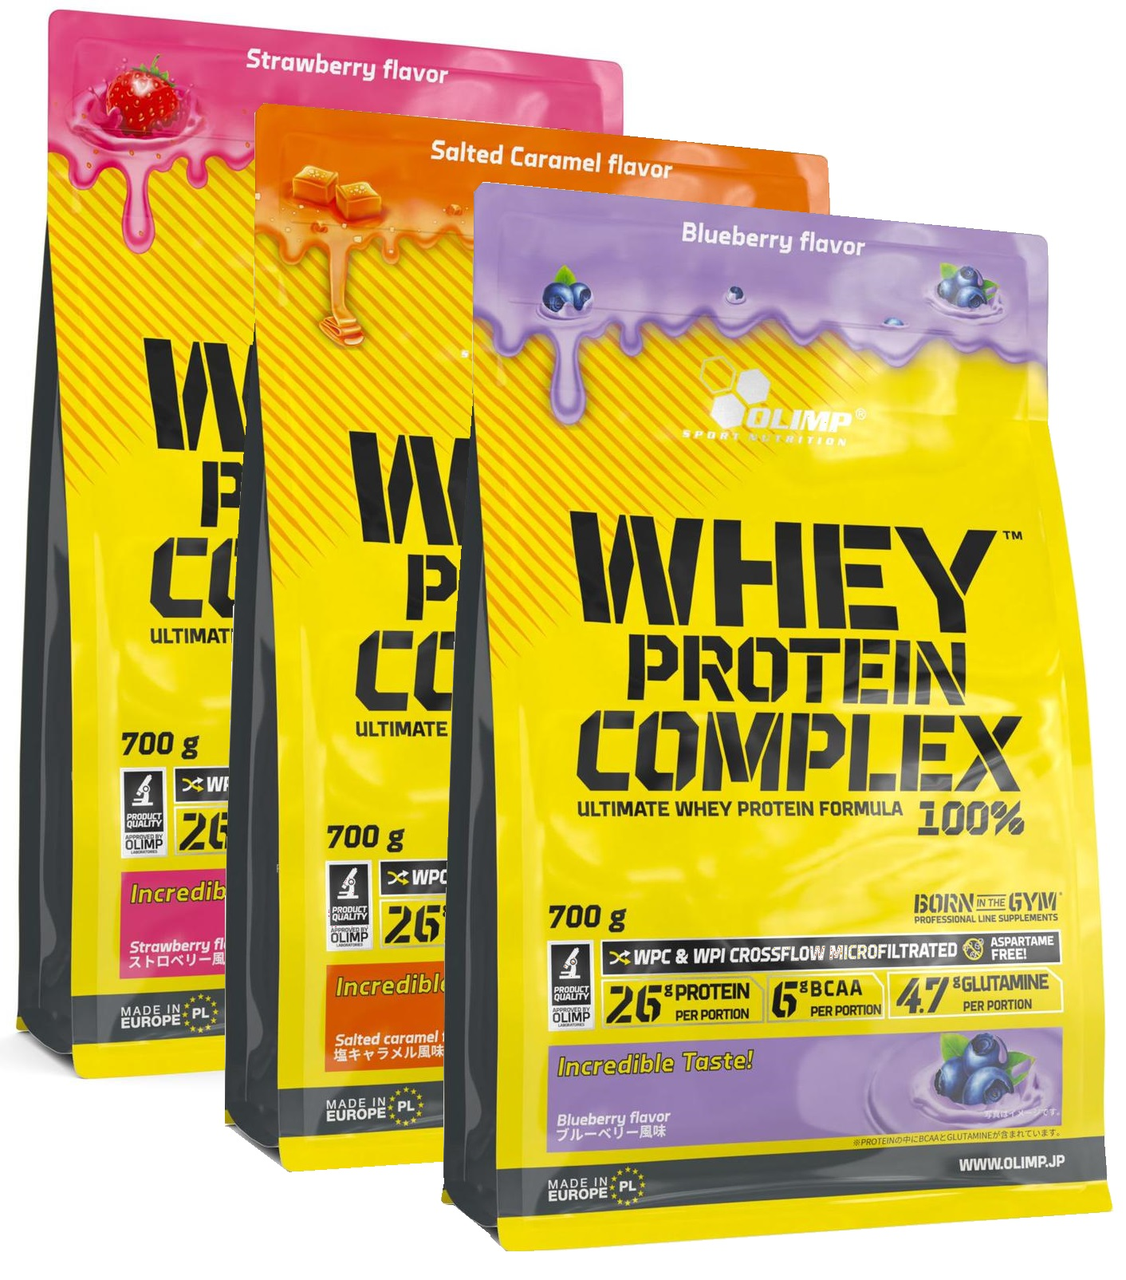 Протеин Whey Protein Complex 100%, 700 g, Olimp Nutrition Salted caramel - фото 1 - id-p116515652